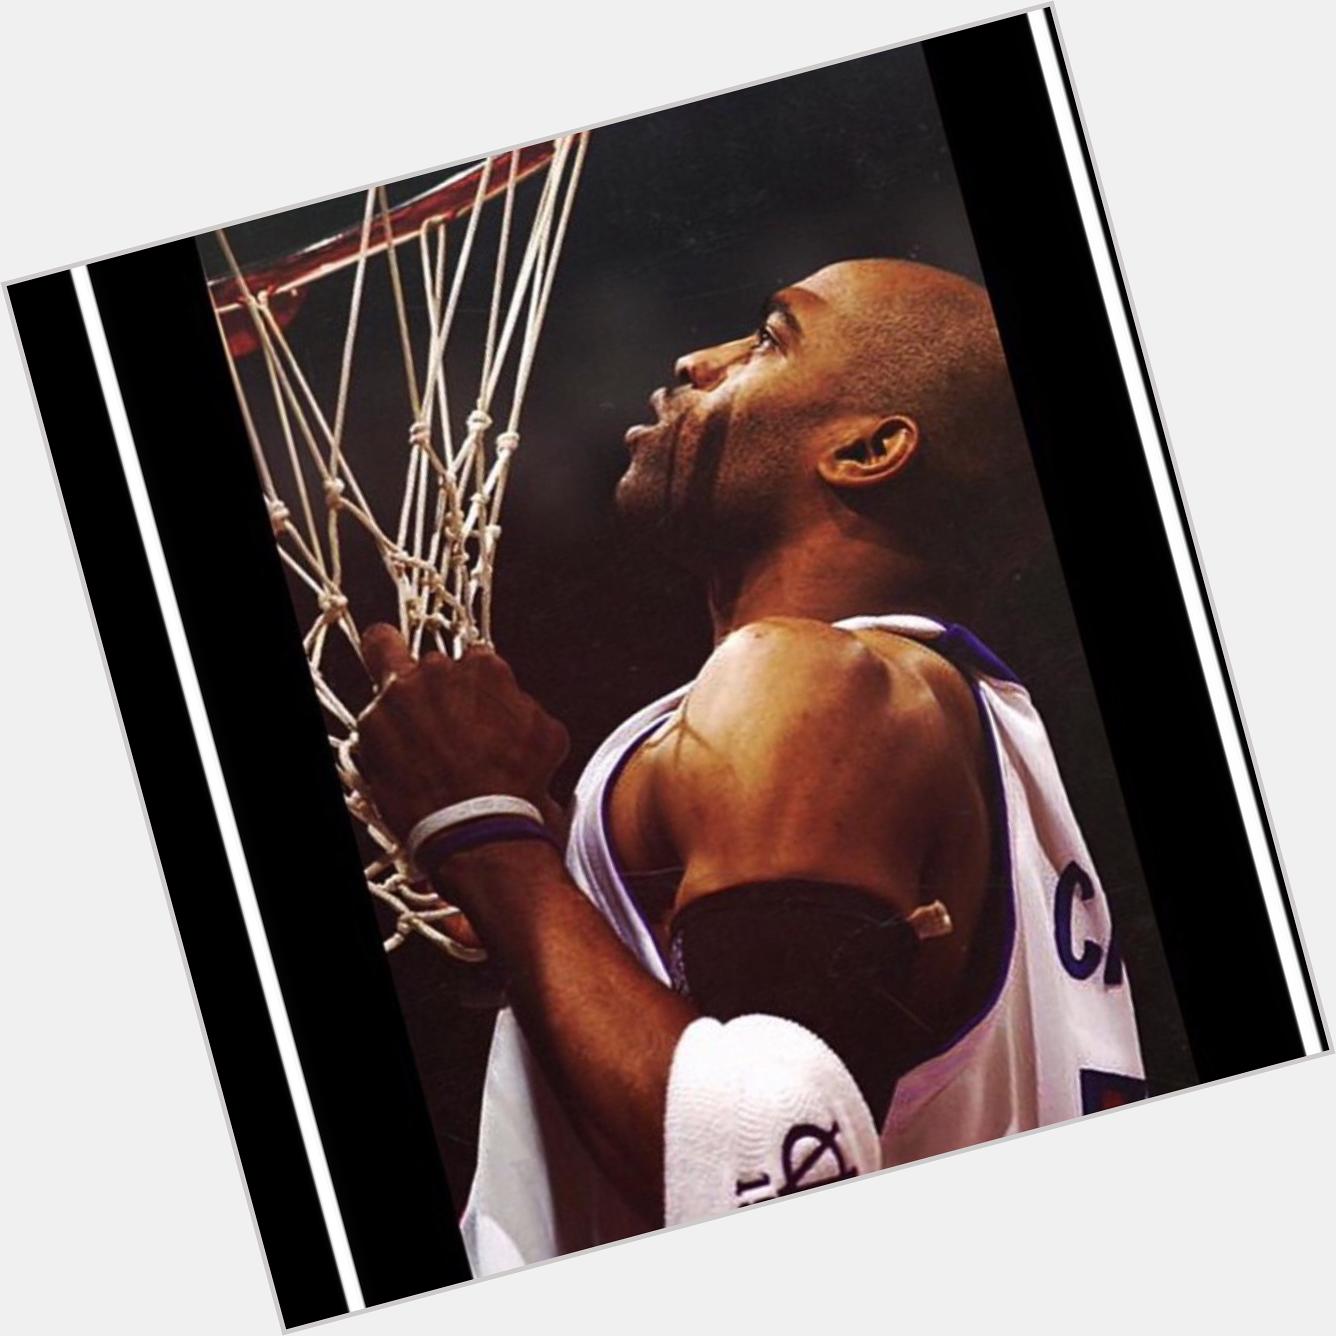 Happy Birthday Vince Carter!!! The GOAT. 